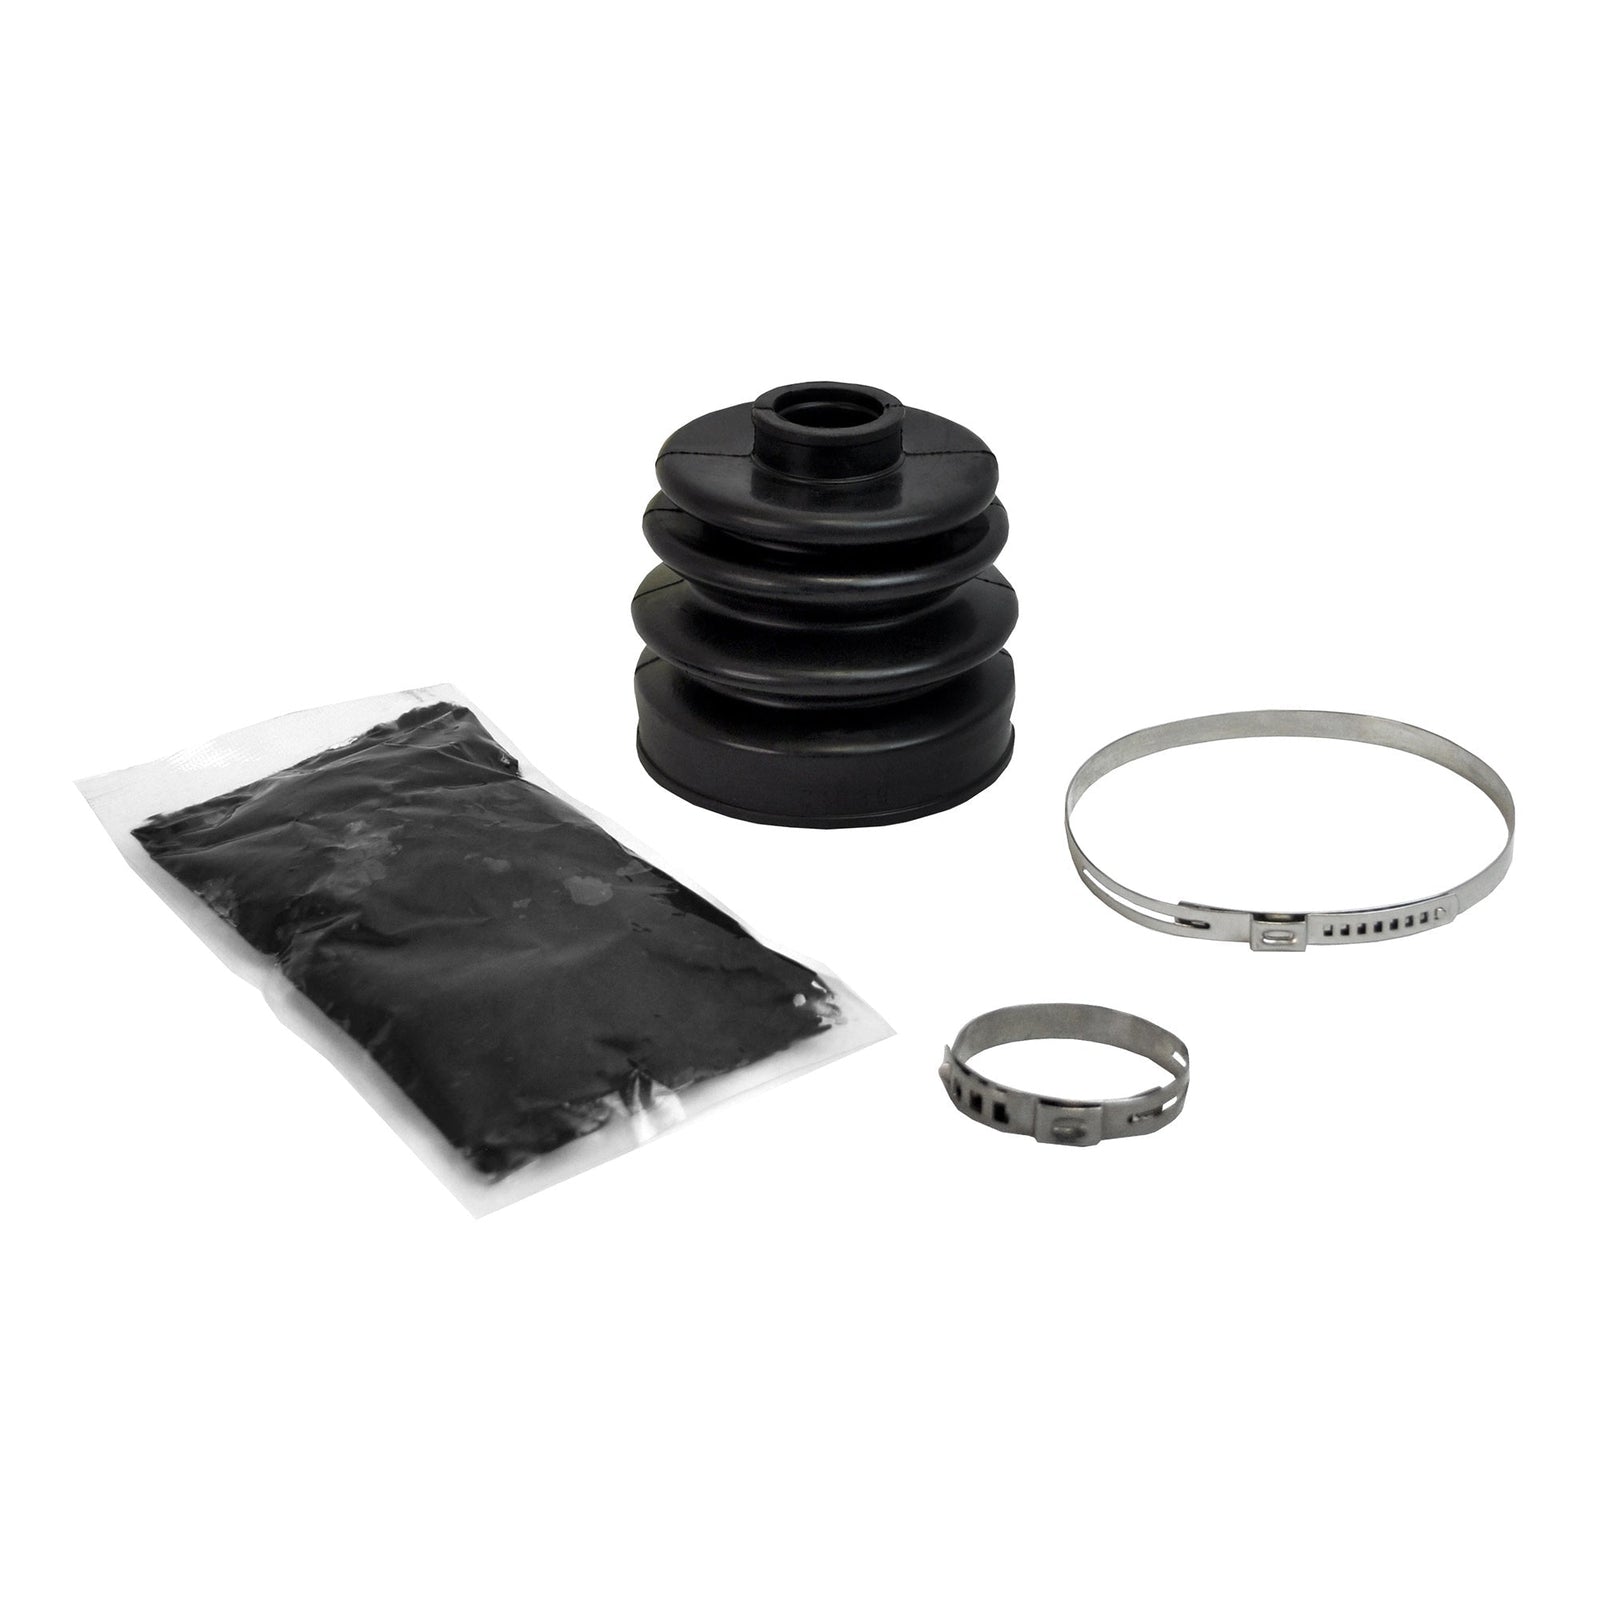 Arctic Cat Prowler 550 Rugged OE Replacement Boot Kit